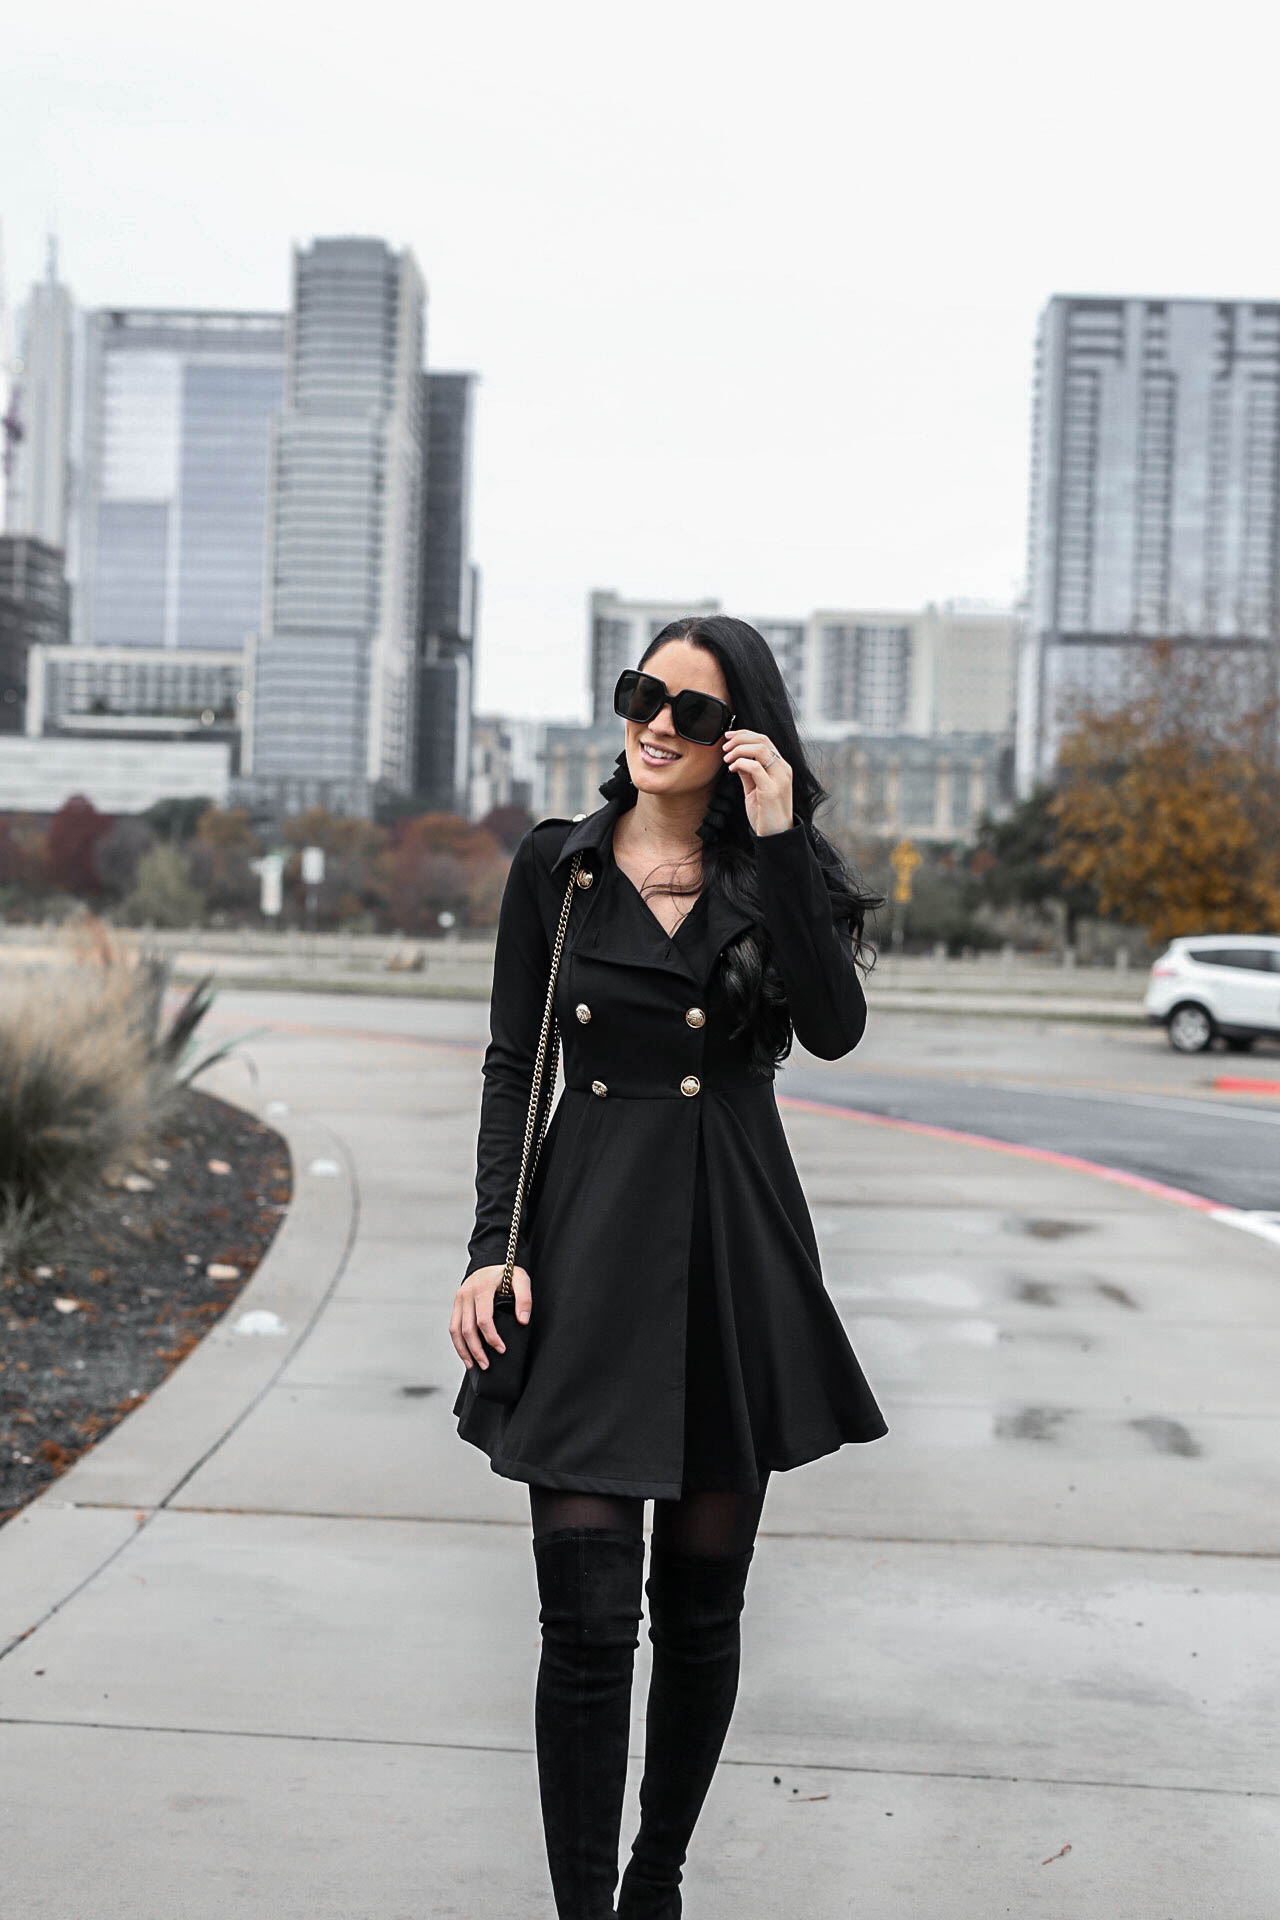 Tips on How to Wear a Black Trench Coat as a Dress | trench coat outfits | trench coats for women | how to style a trench coat | dresses for winter | winter fashion tips | winter style ideas || Dressed to Kill #trenchcoat #winterdresses #winterfashion - How to Wear a Trench Coat Dress by popular Austin fashion blogger Dressed to Kill